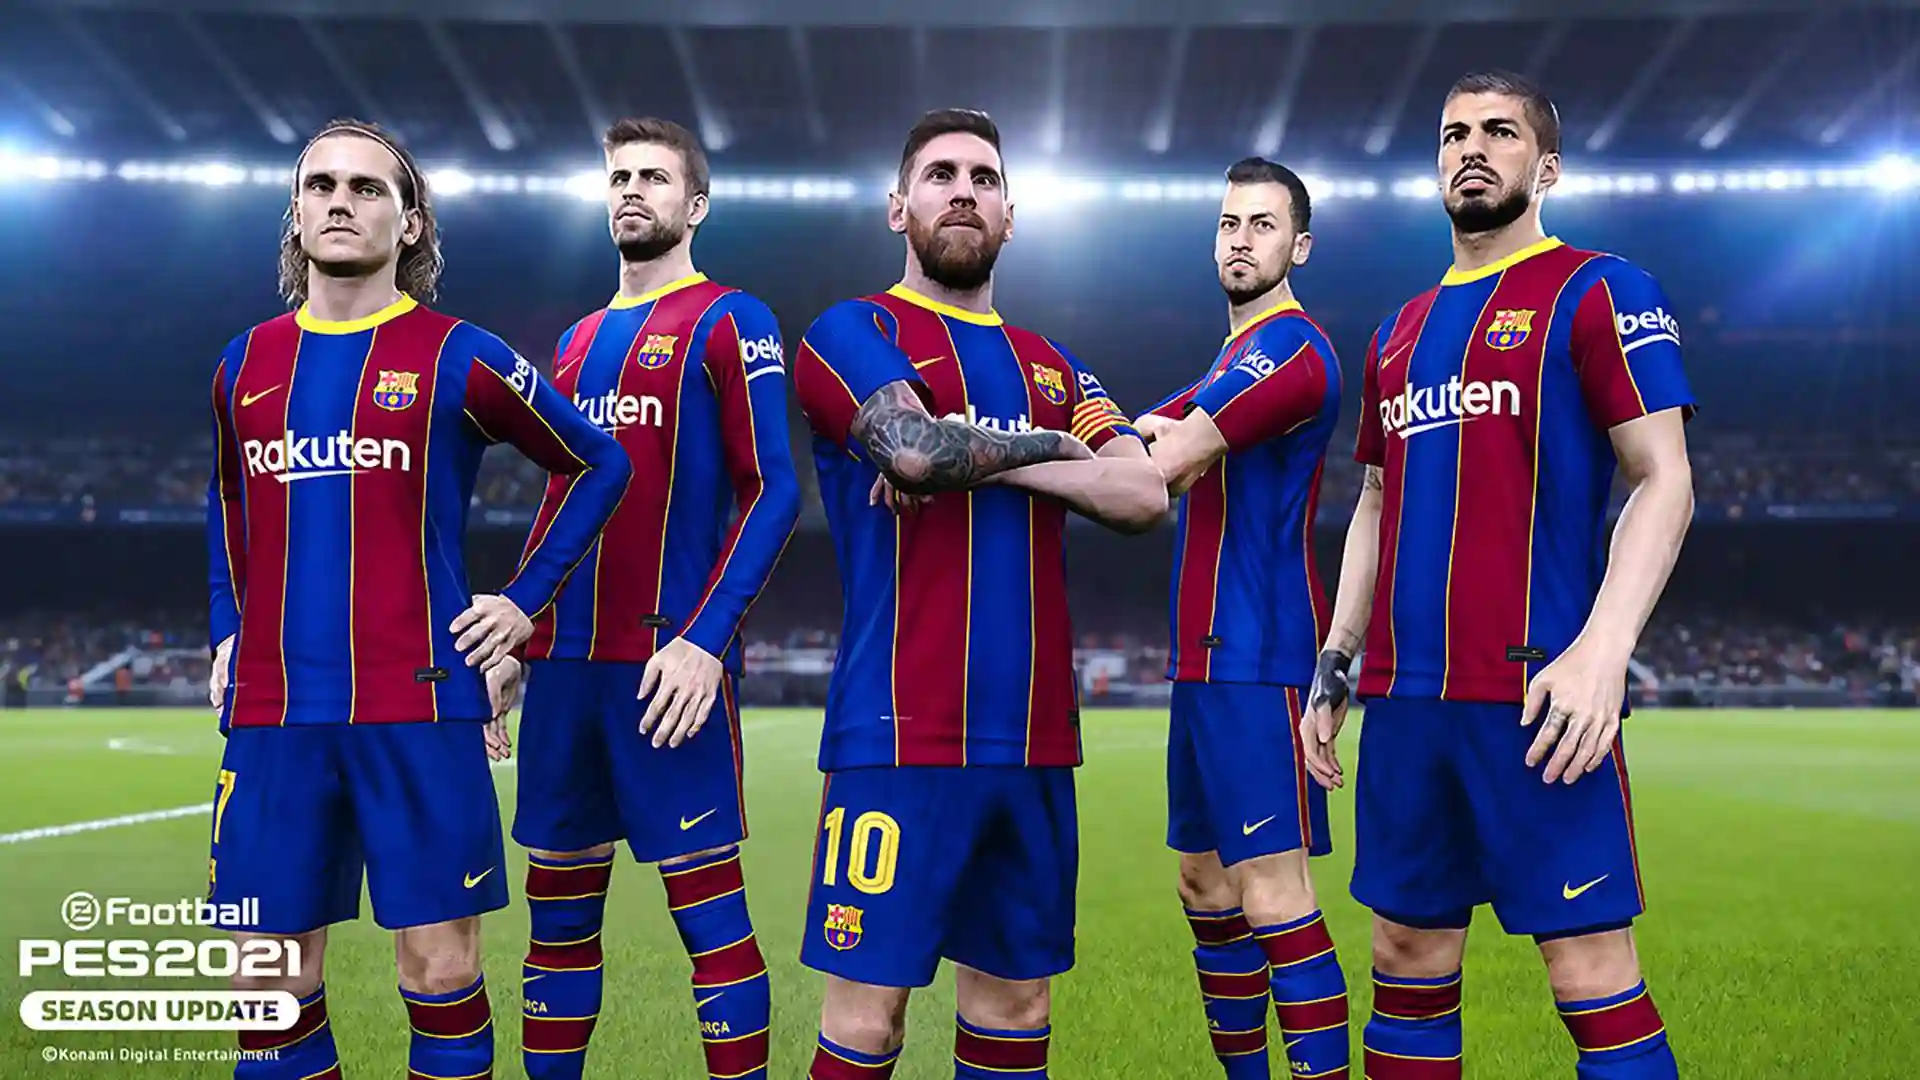 The cover of eFootBall PES 2021 is not in danger, Messi stays at Barça